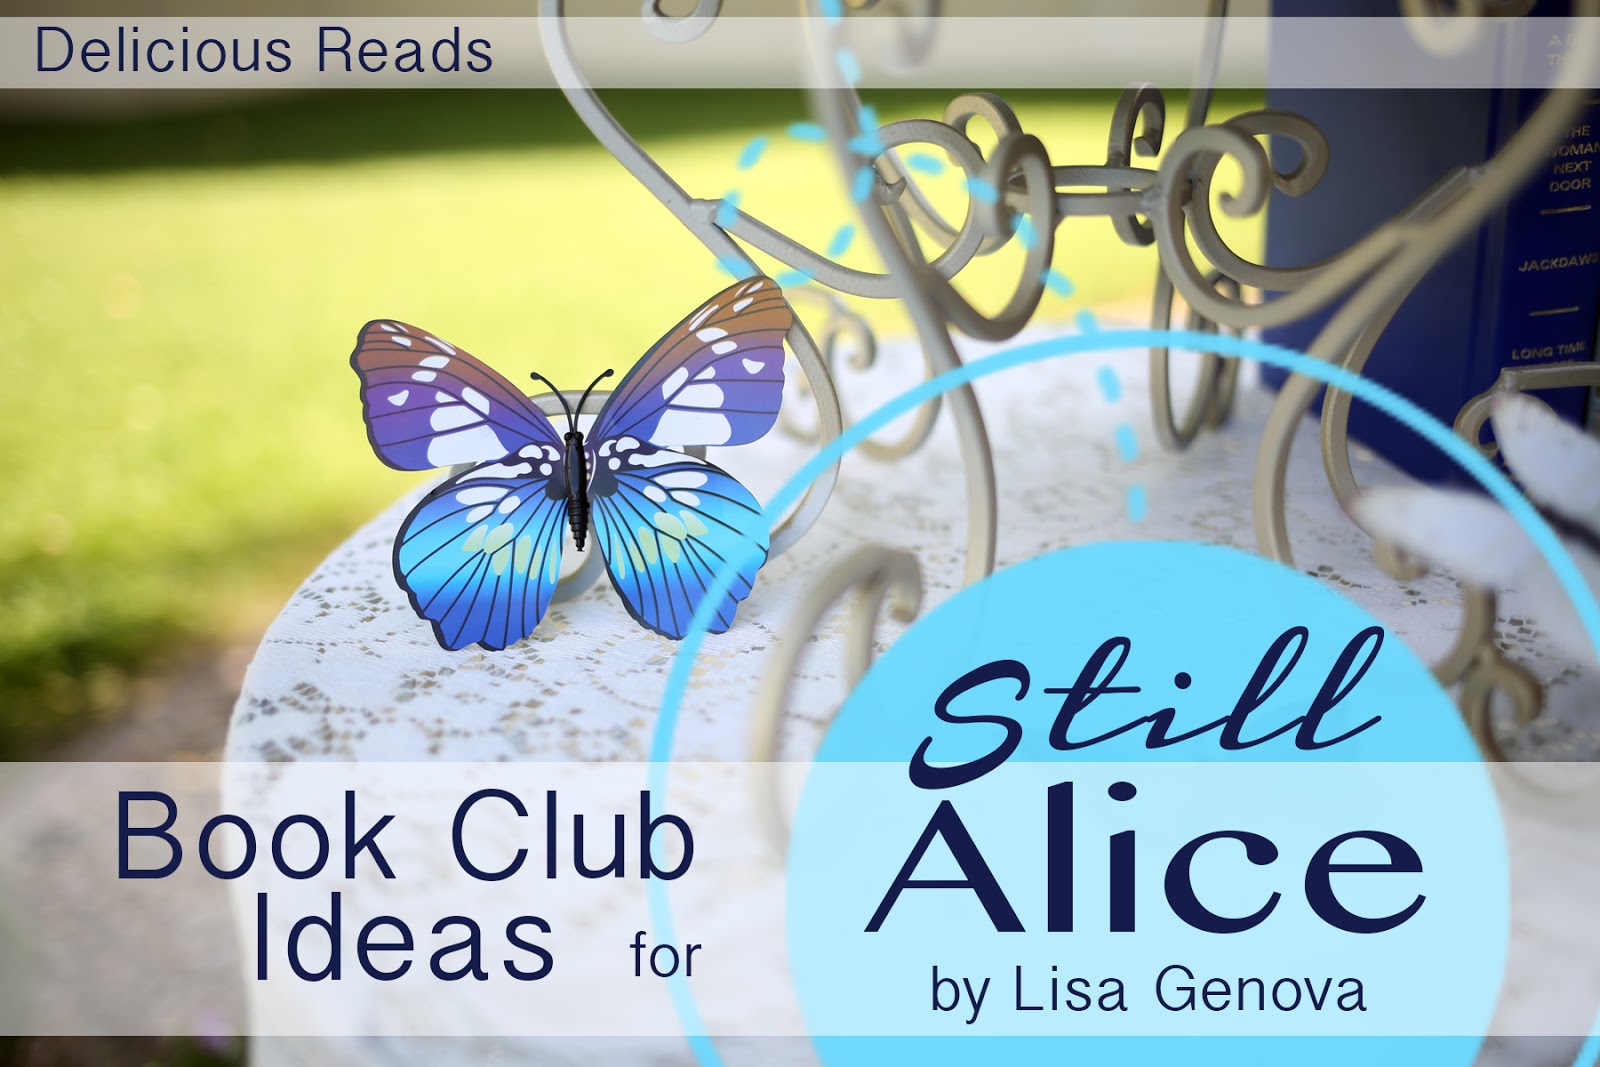 Liane Moriarty books. Alice and Sparkle книга. My book Club. "Book Club the second Chapter" movie poster.